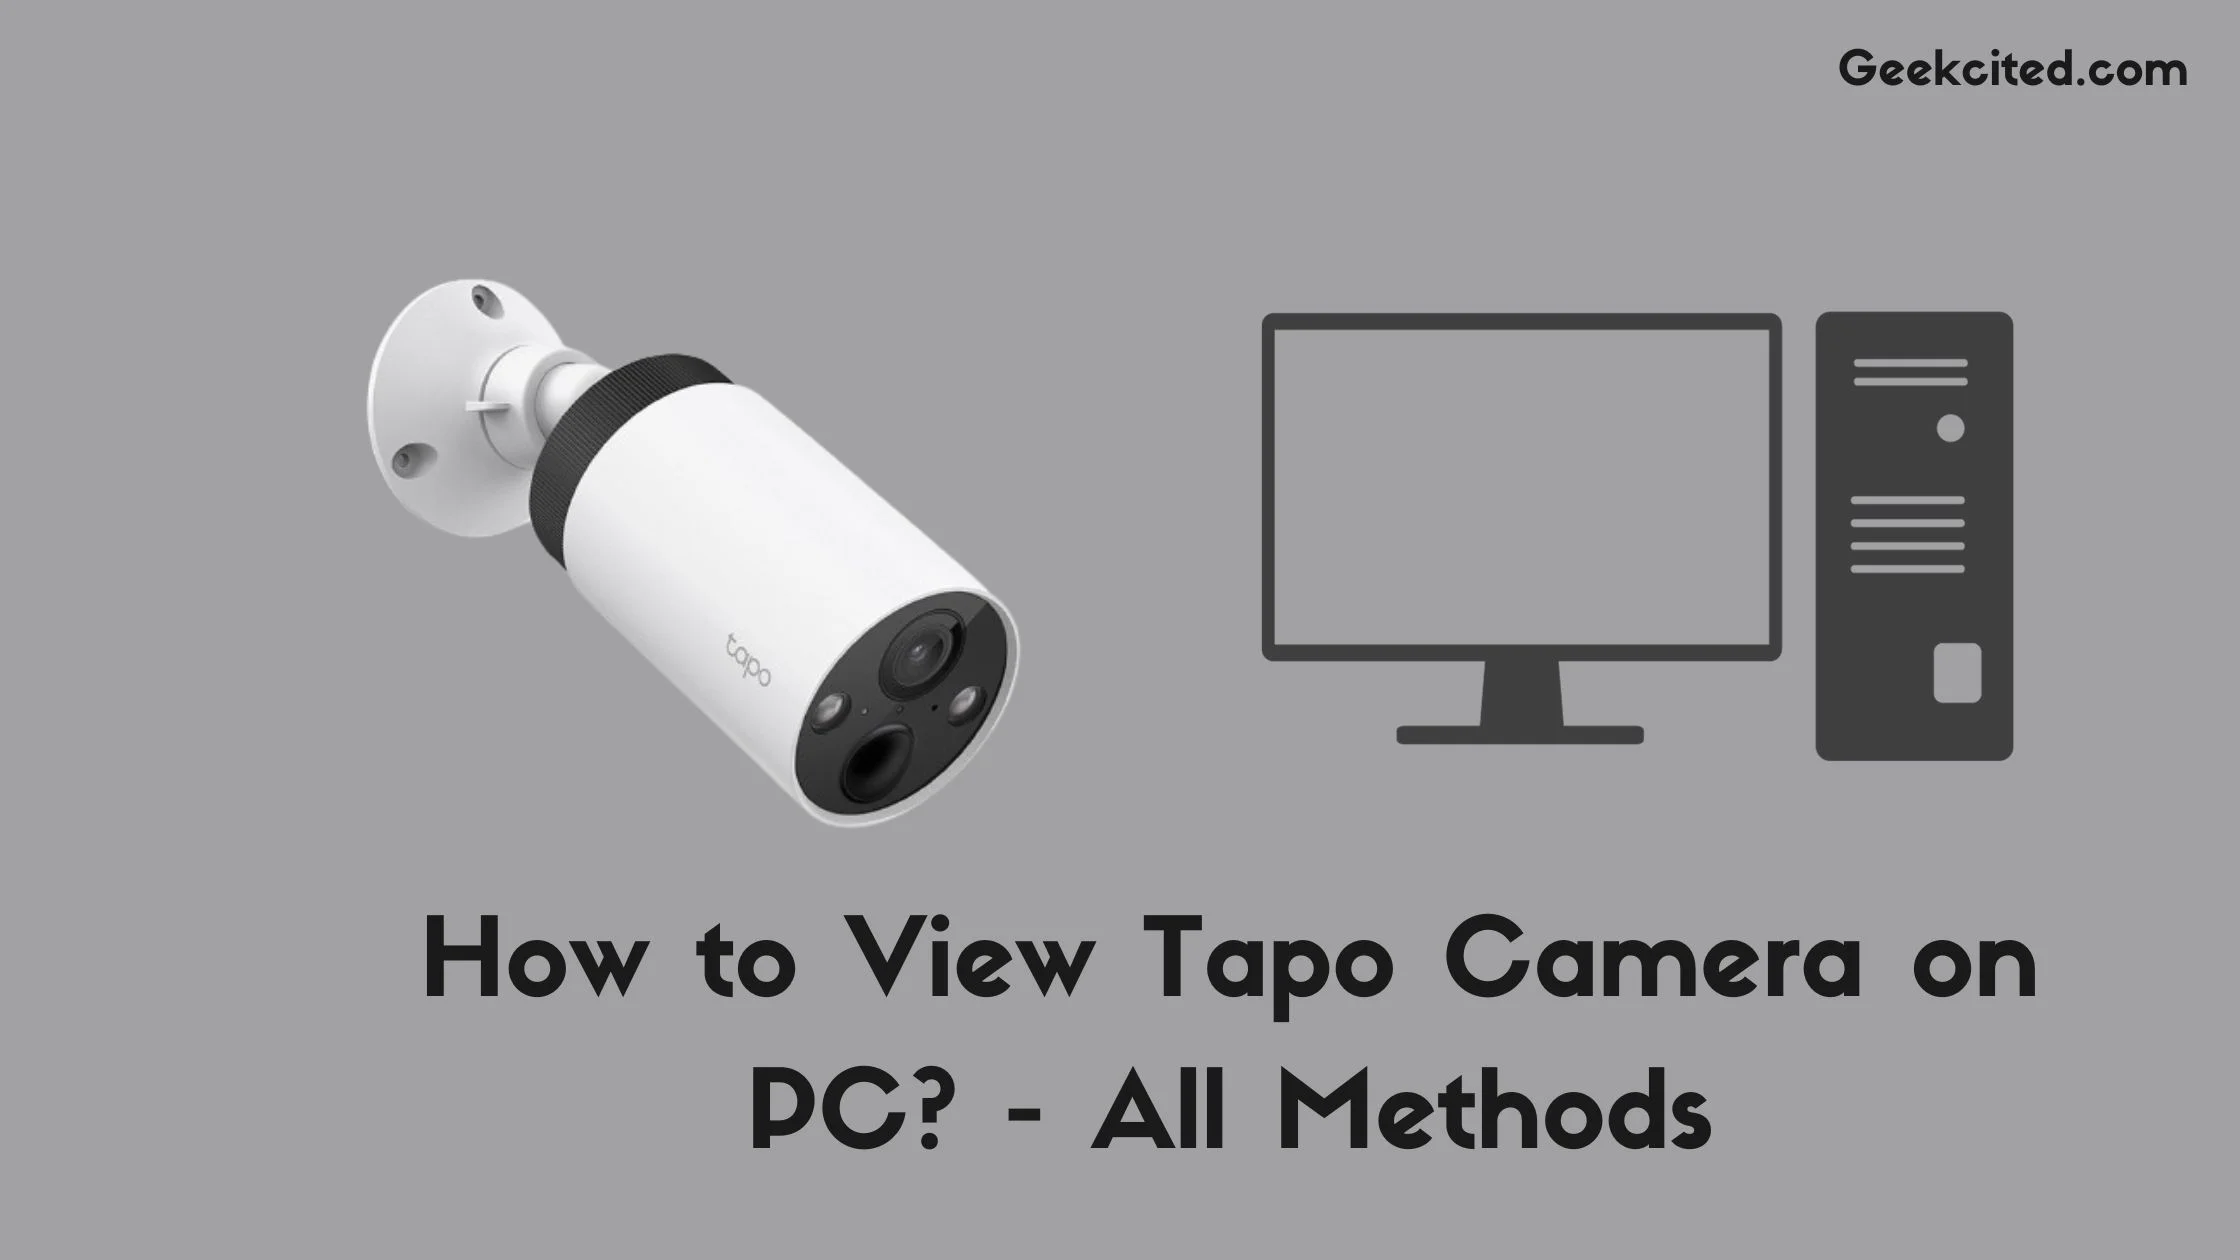 How to View Tapo Camera on PC